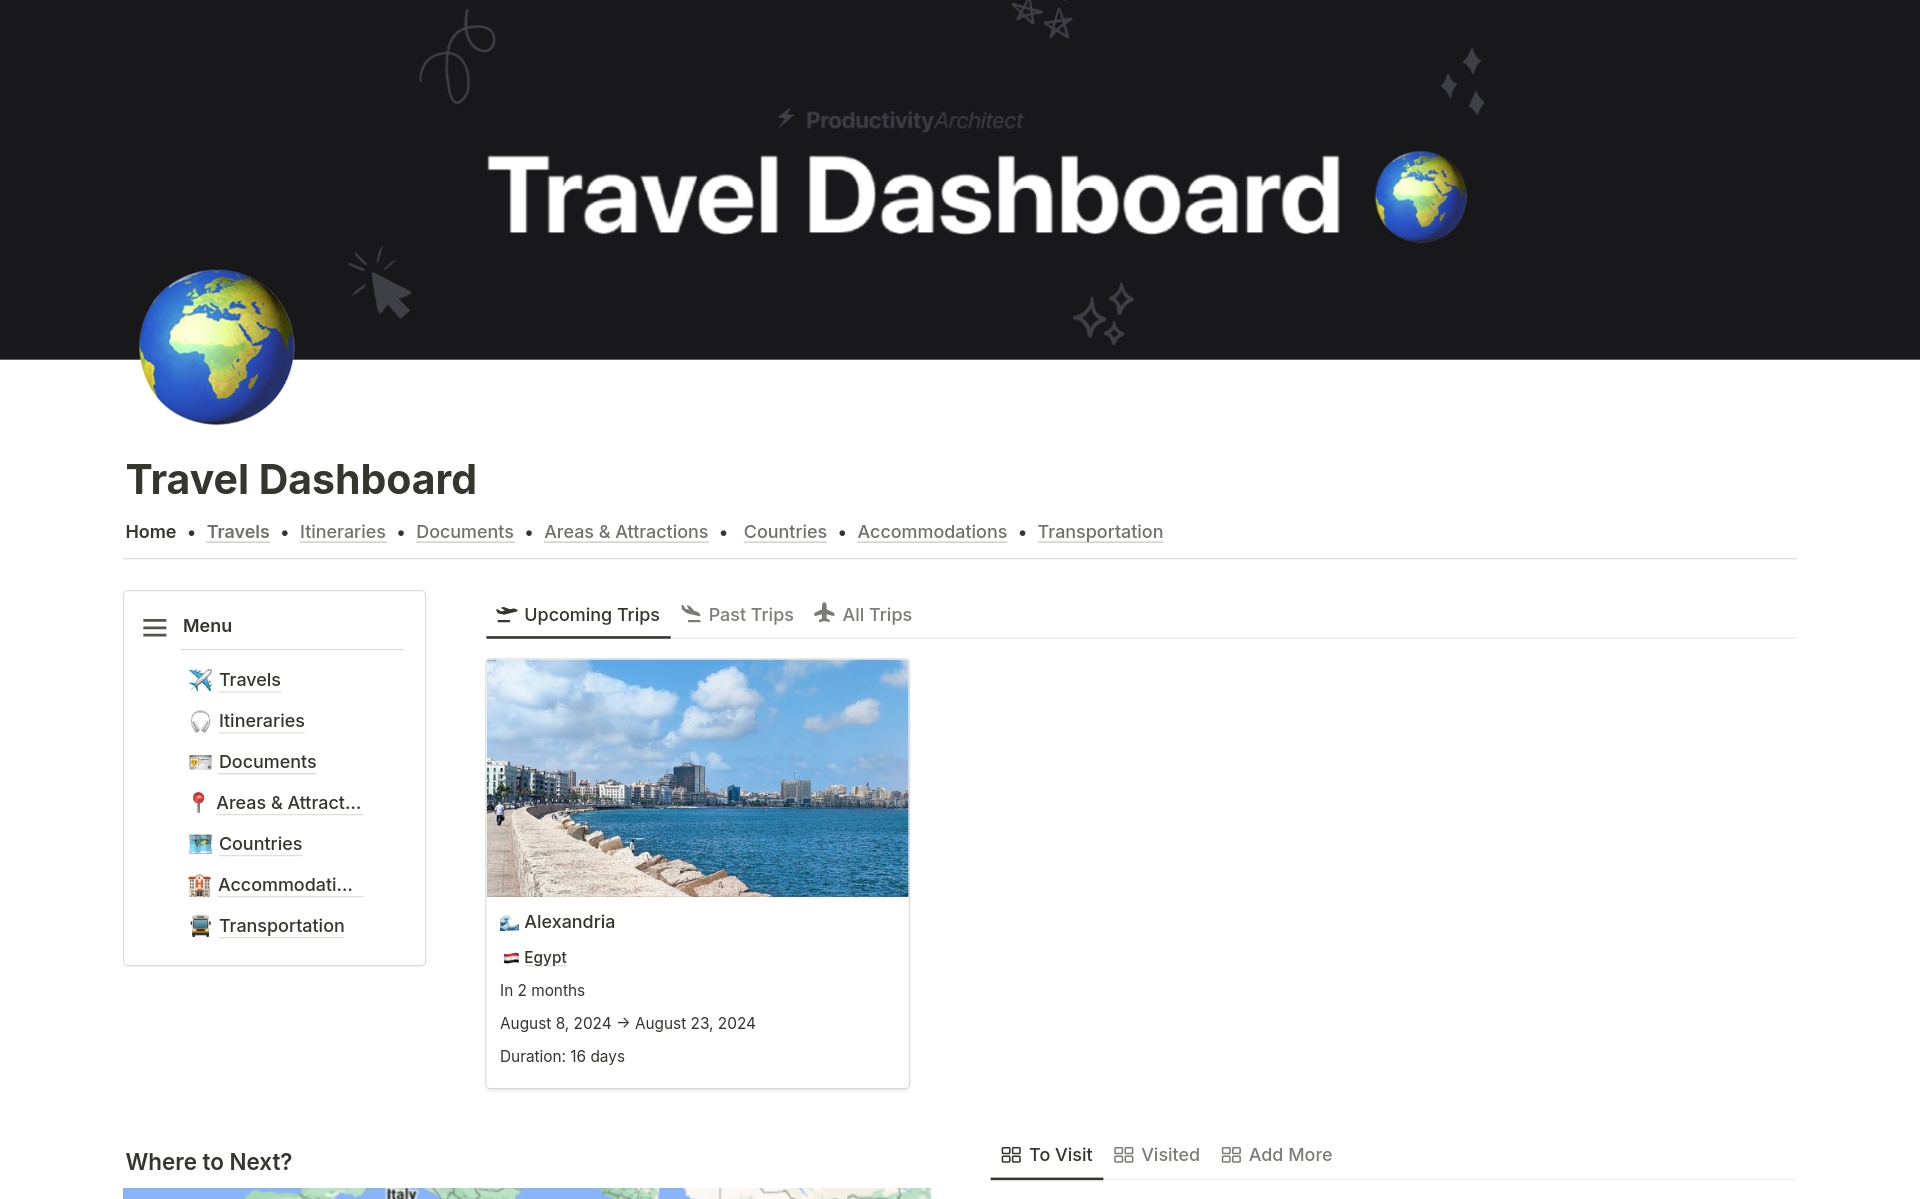 You'll get the most complete travel dashboard.